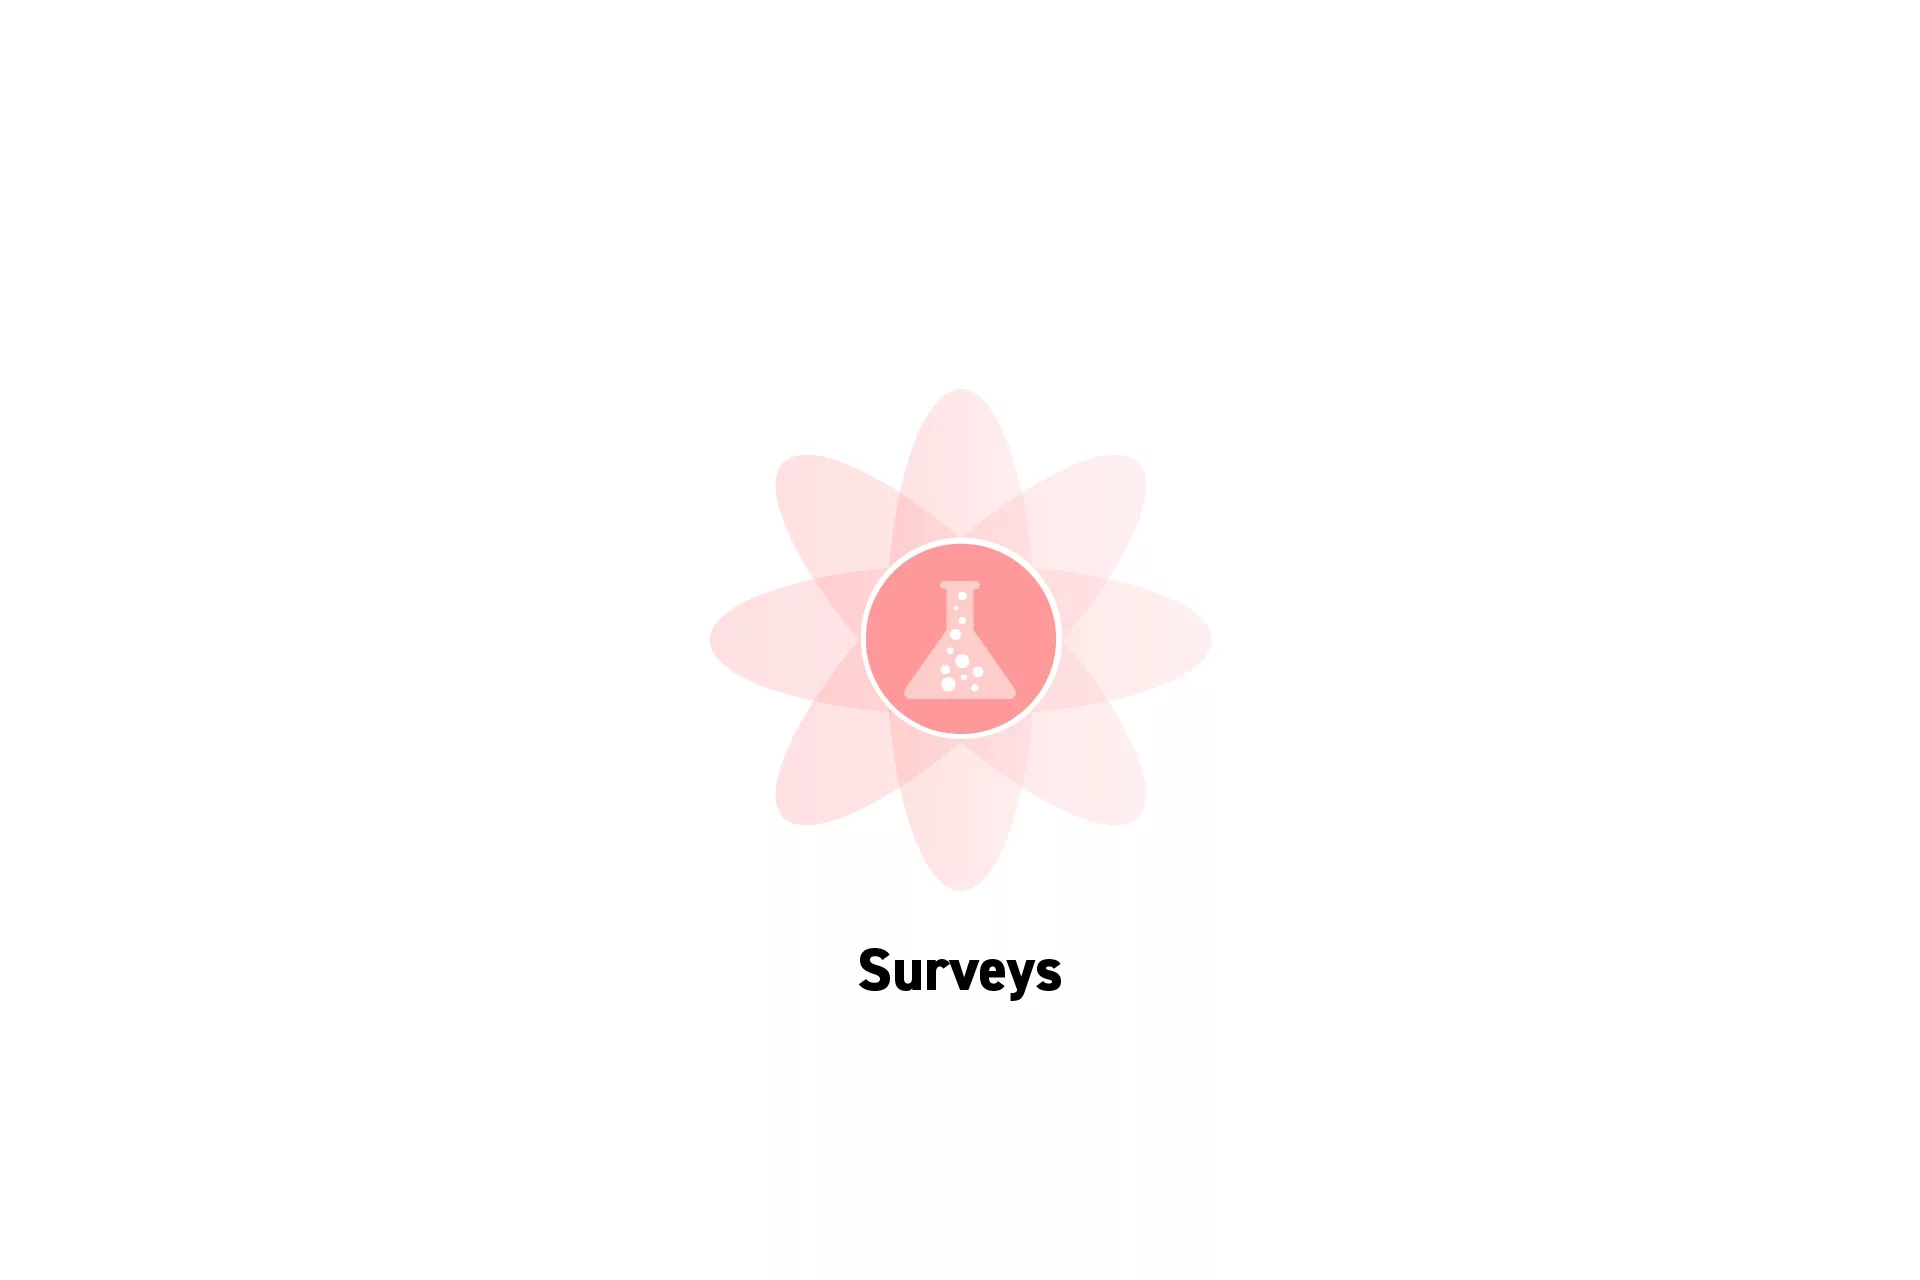 A flower that represents Strategy with the text “Surveys” beneath it.